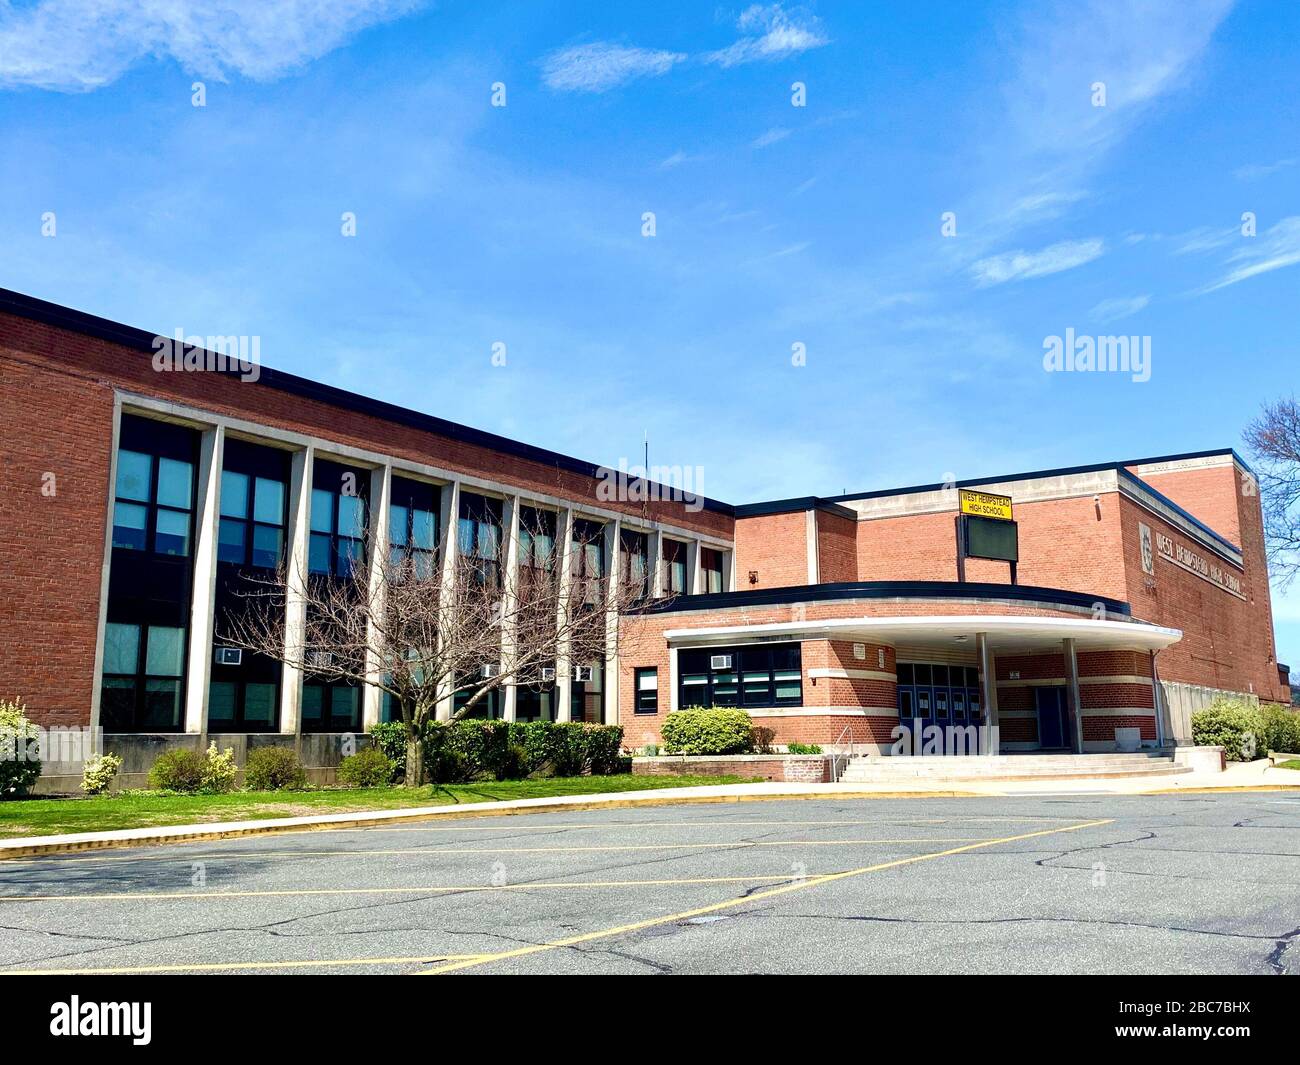 WEST HEMPSTEAD,  NEW YORK - APRIL 1, 2020:  West Hempstead High School in Nassau County New York stand empty due to mandatory closure amid Covid-19 Co Stock Photo